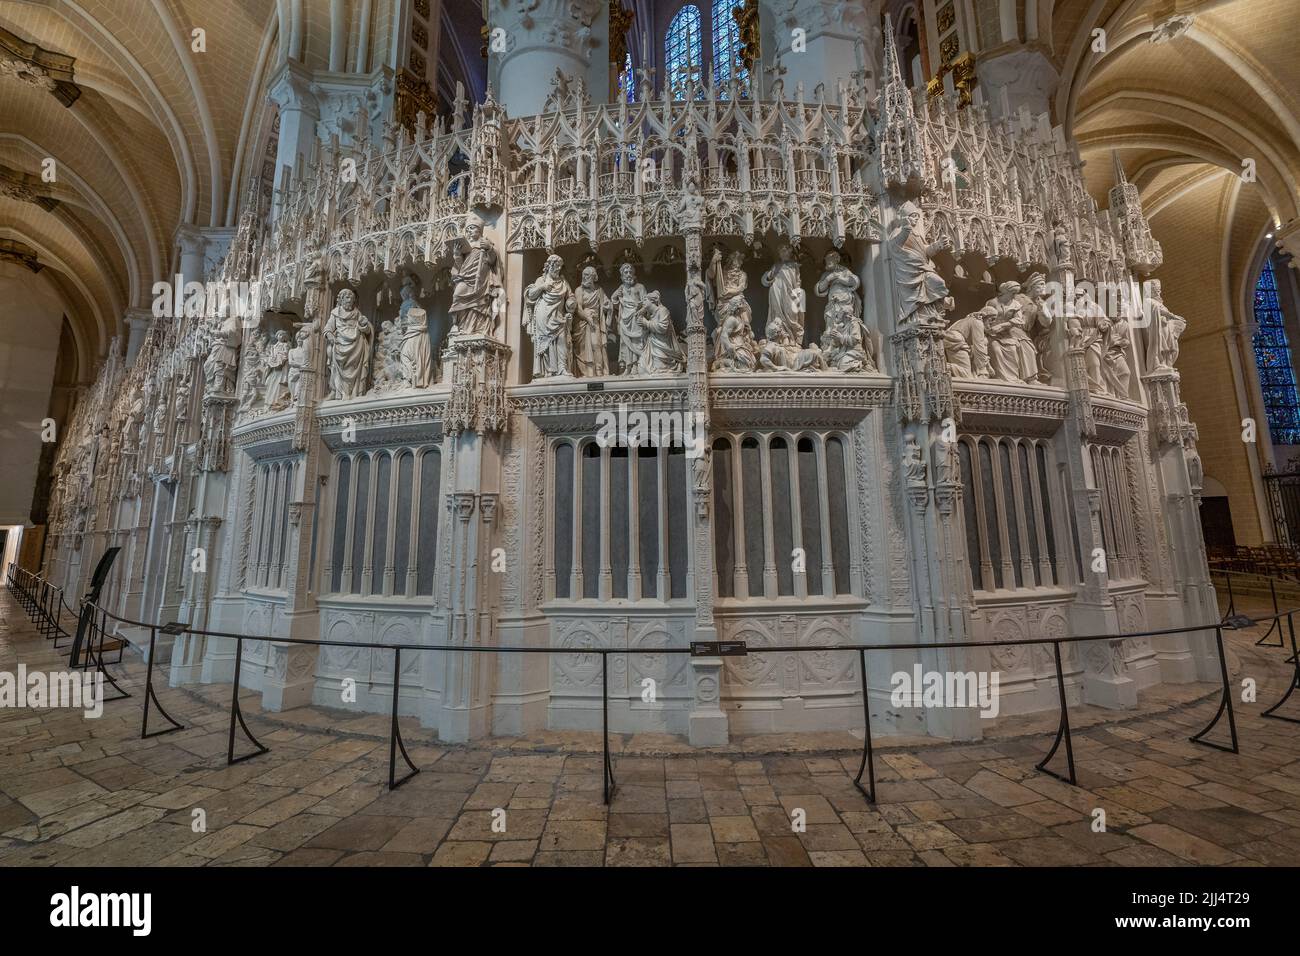 The choir wall of Chartres Cathedral Stock Photo